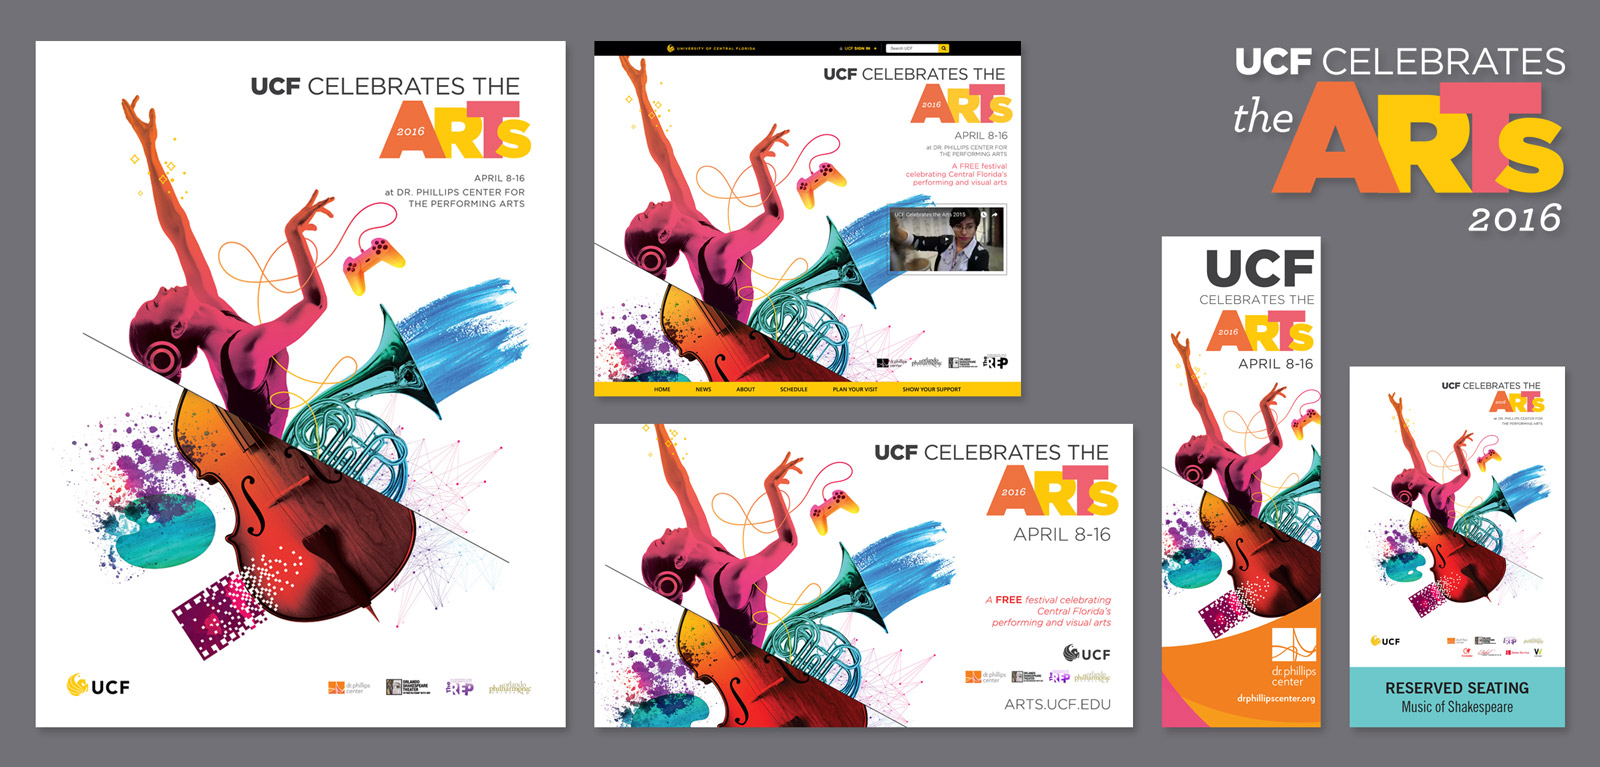 Publication examples from UCF Celebrates the Arts 2016